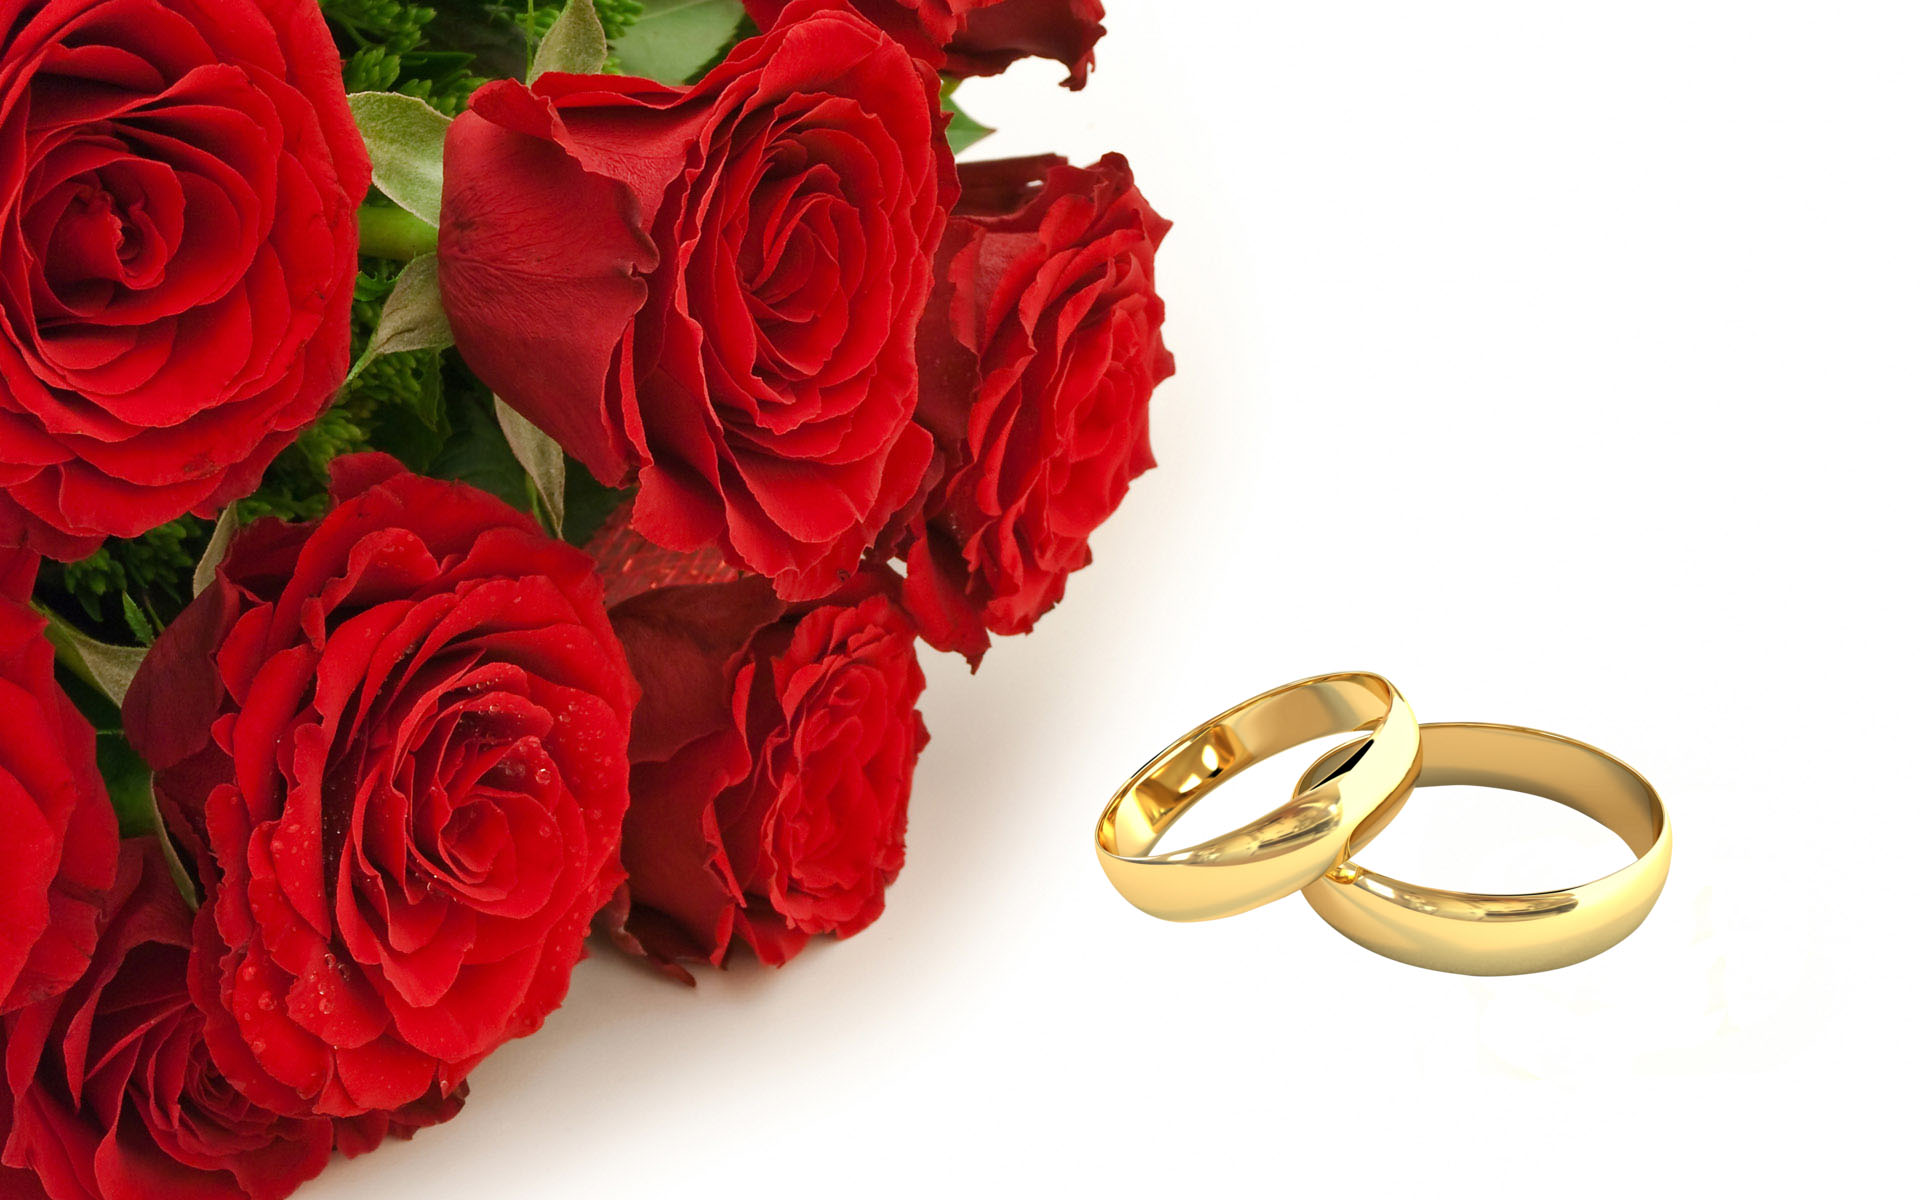 Wedding rings and red roses flowers wallpaper : Wallpapers13.com